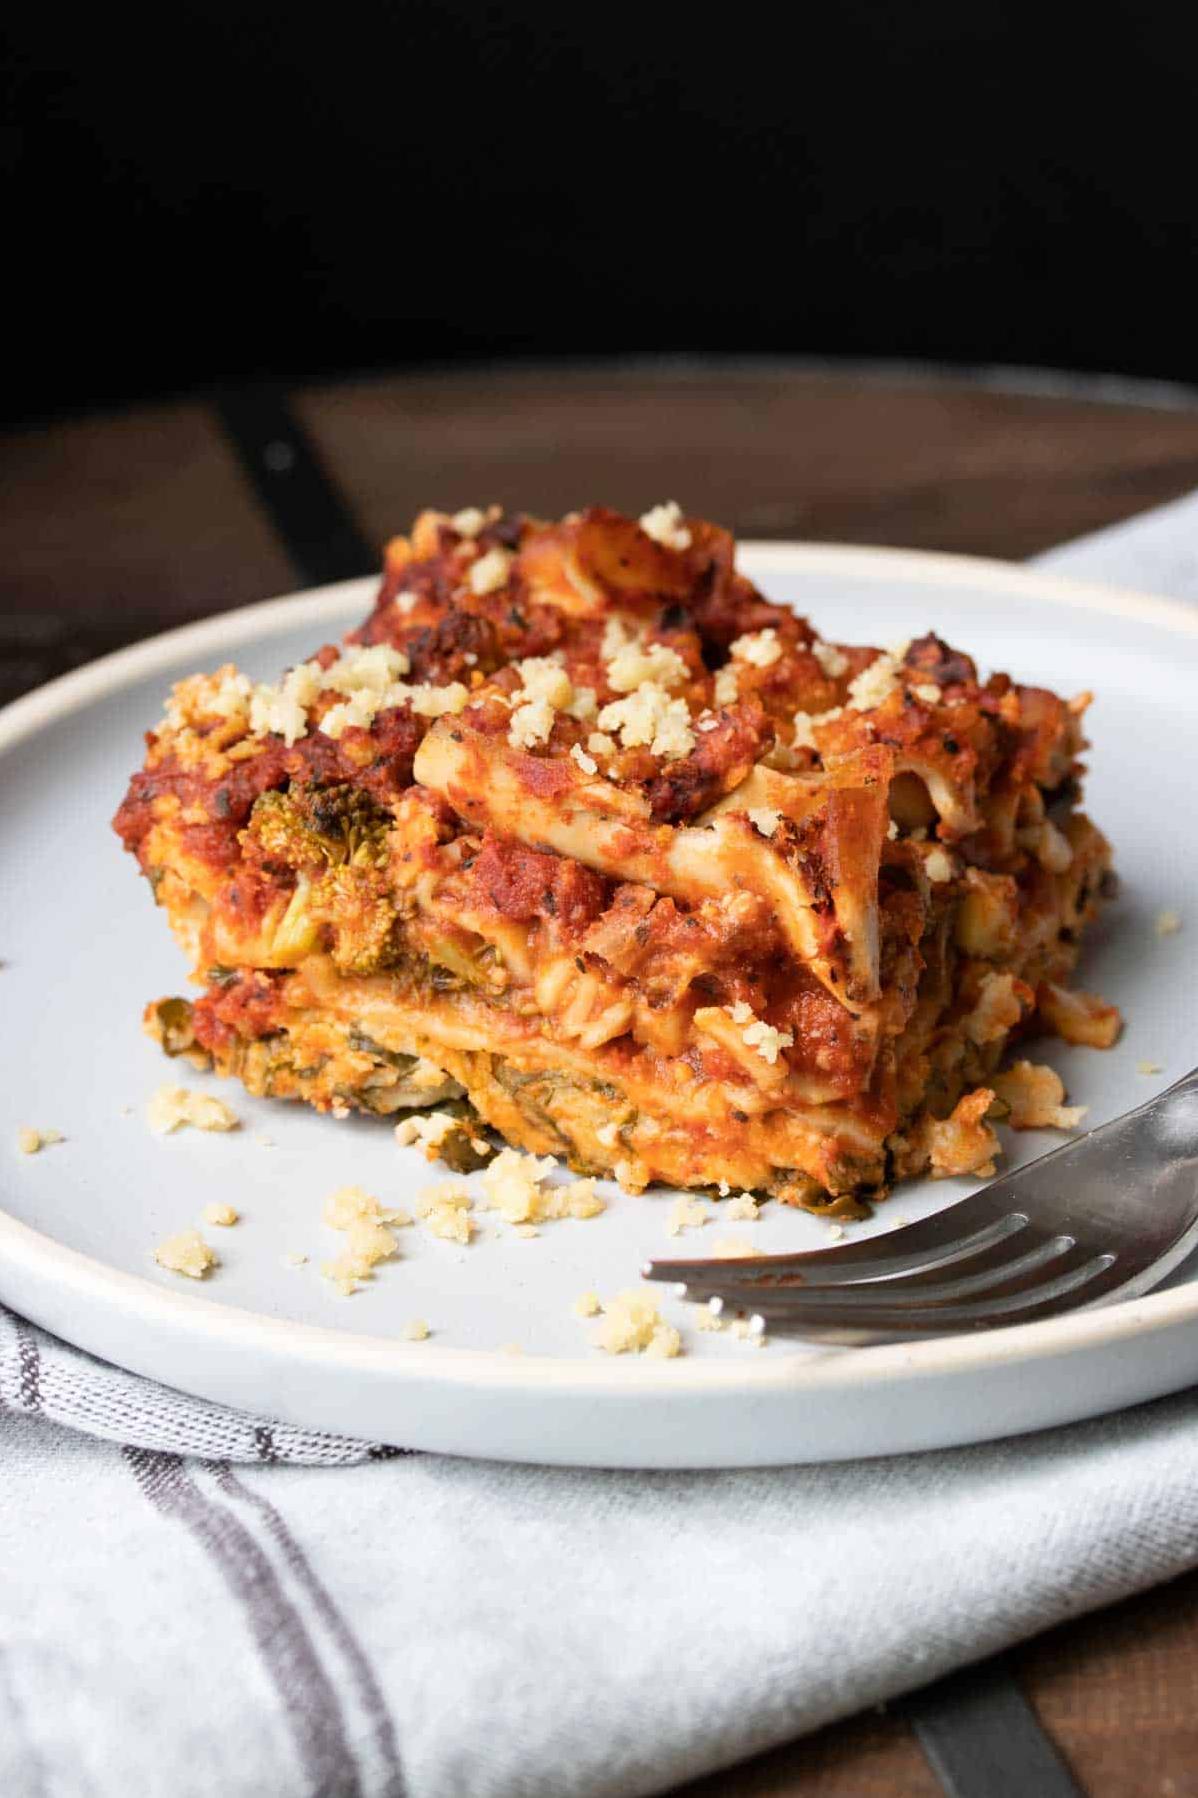  Who says lasagna can't be healthy? Try this recipe and prove them wrong!